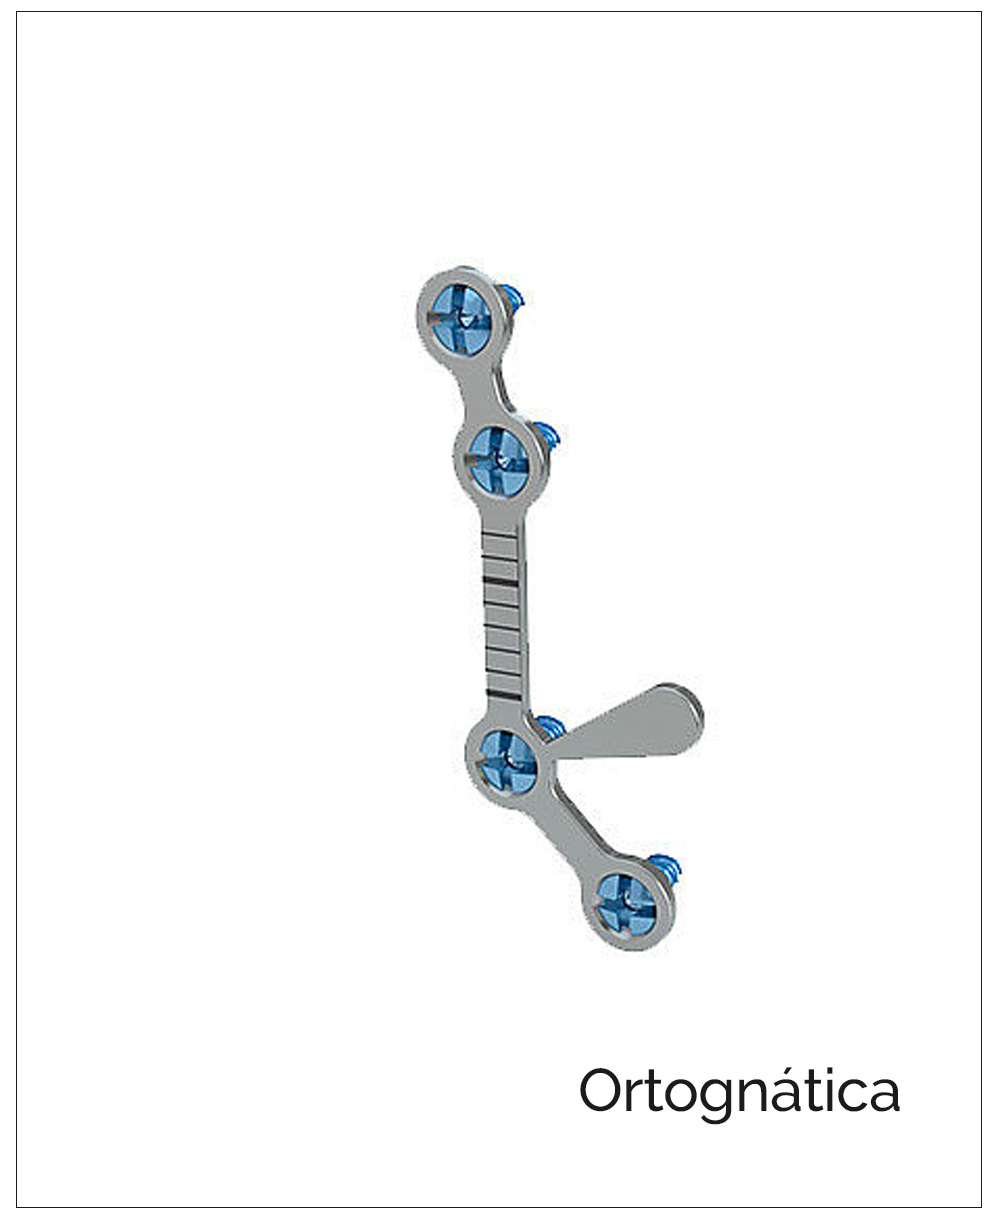 LevelOne Fixation System. Osteosynthesis